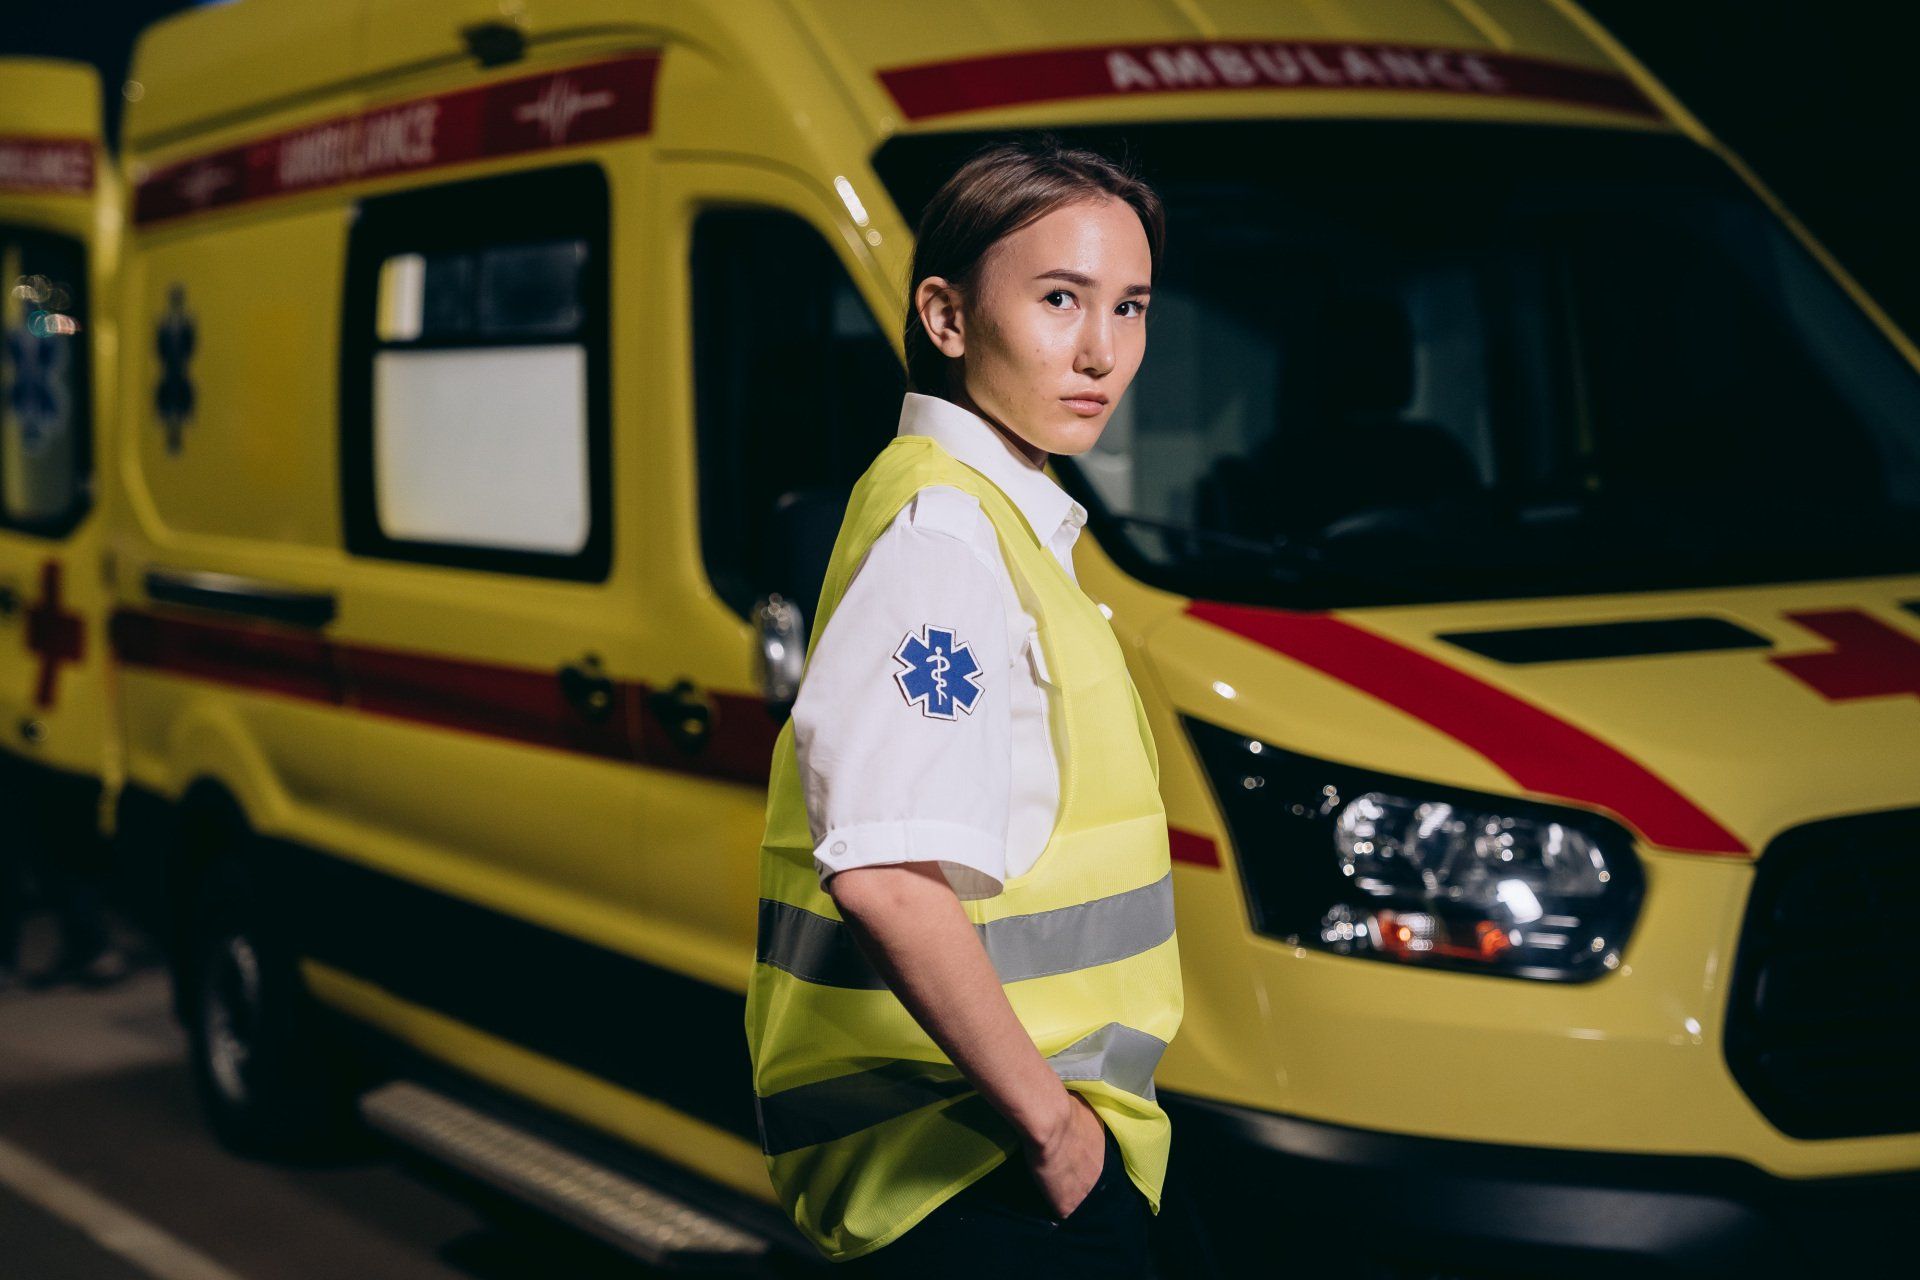 A photograph of a young Asian woman in a paramedic uniform standing in front of a yellow ambulance